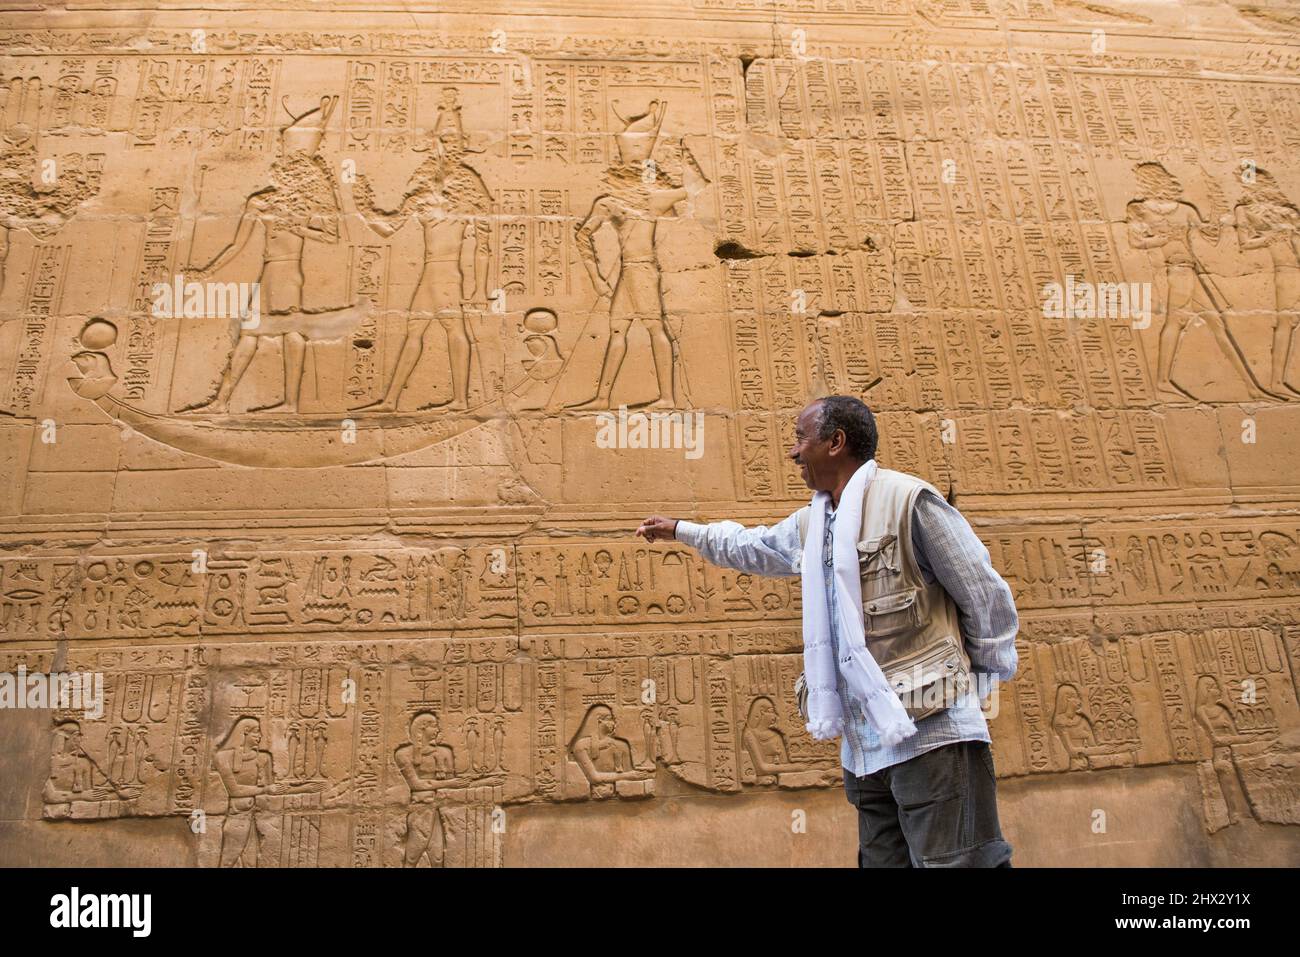 Mamdouh Kamel, Egyptian guide, deciphering the meaning of the painted engravings and hieroglyphs at the Temple of Edfu, Egypt, Northern Africa. Stock Photo